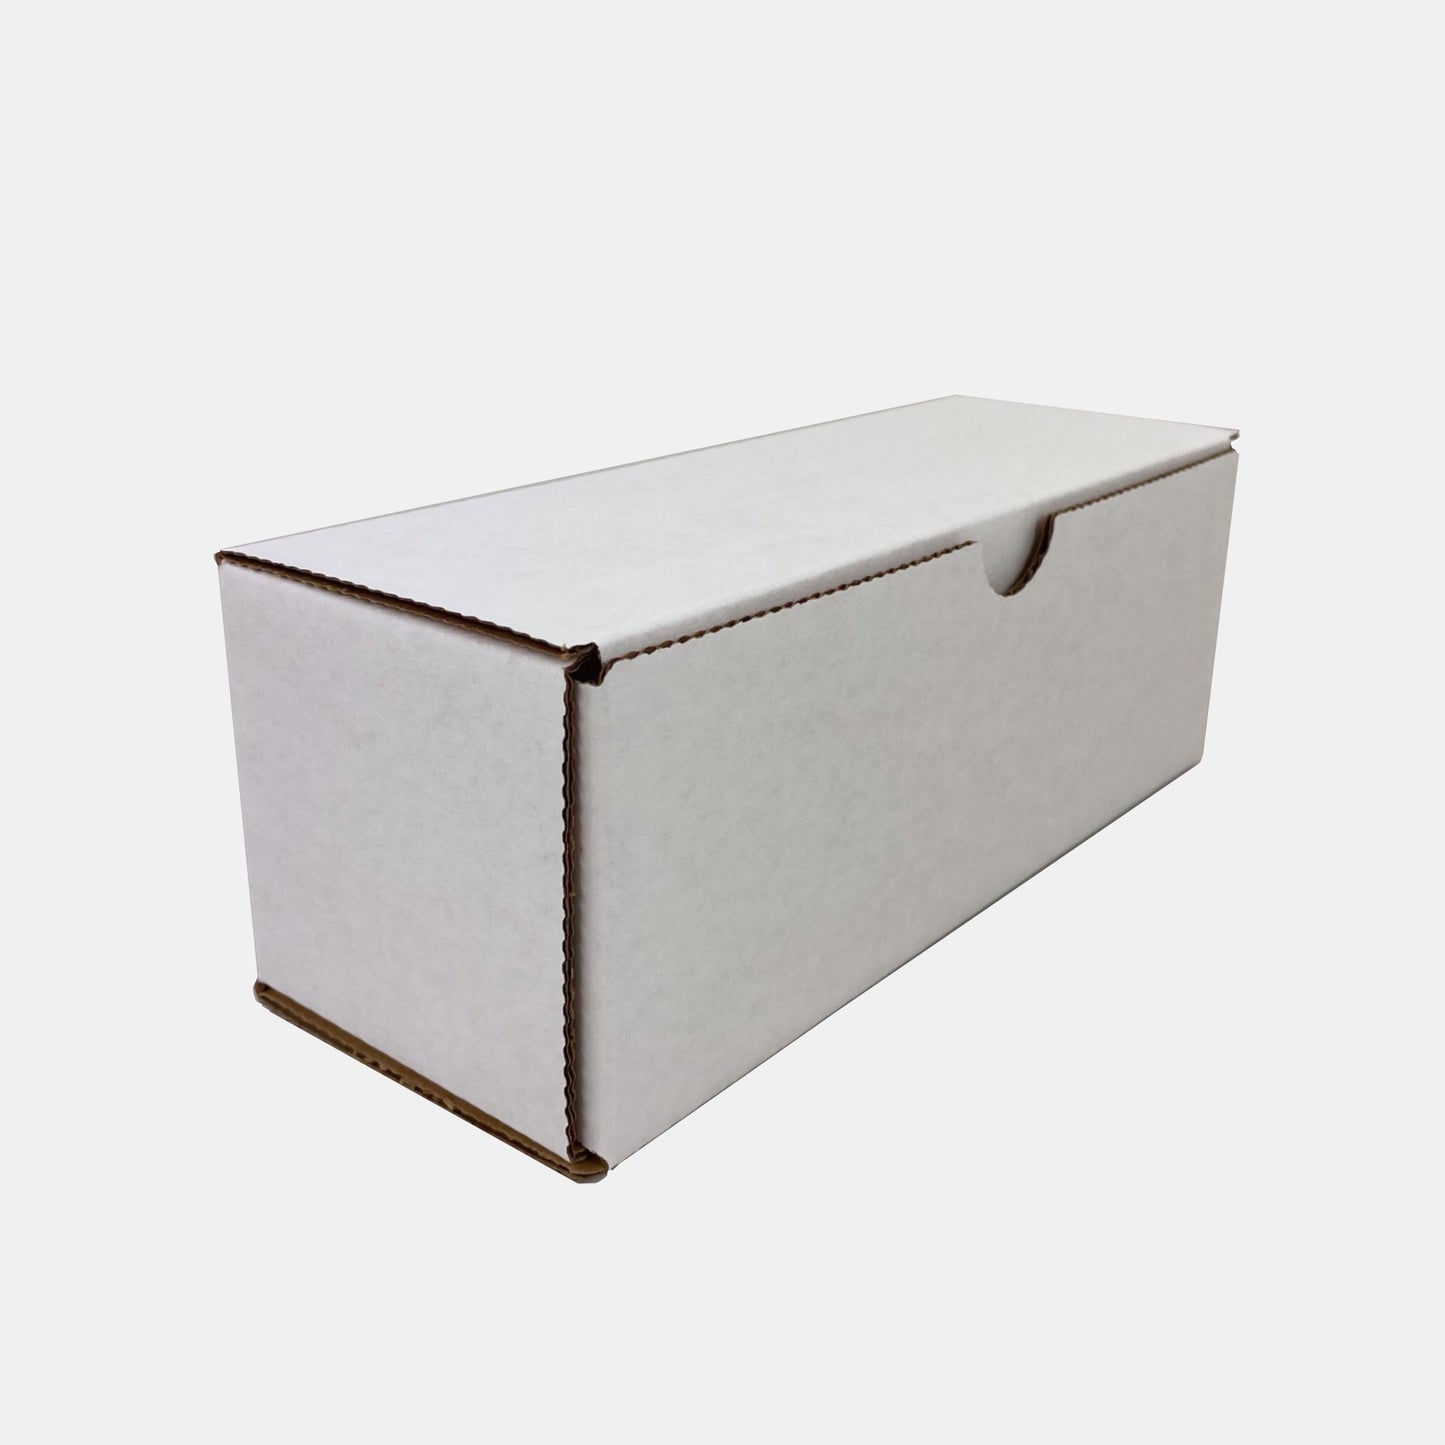 White Cardboard Shipping Boxes - Small / Medium - 5 x 3 x 3 inches by ULINE - K. A. Artist Shop